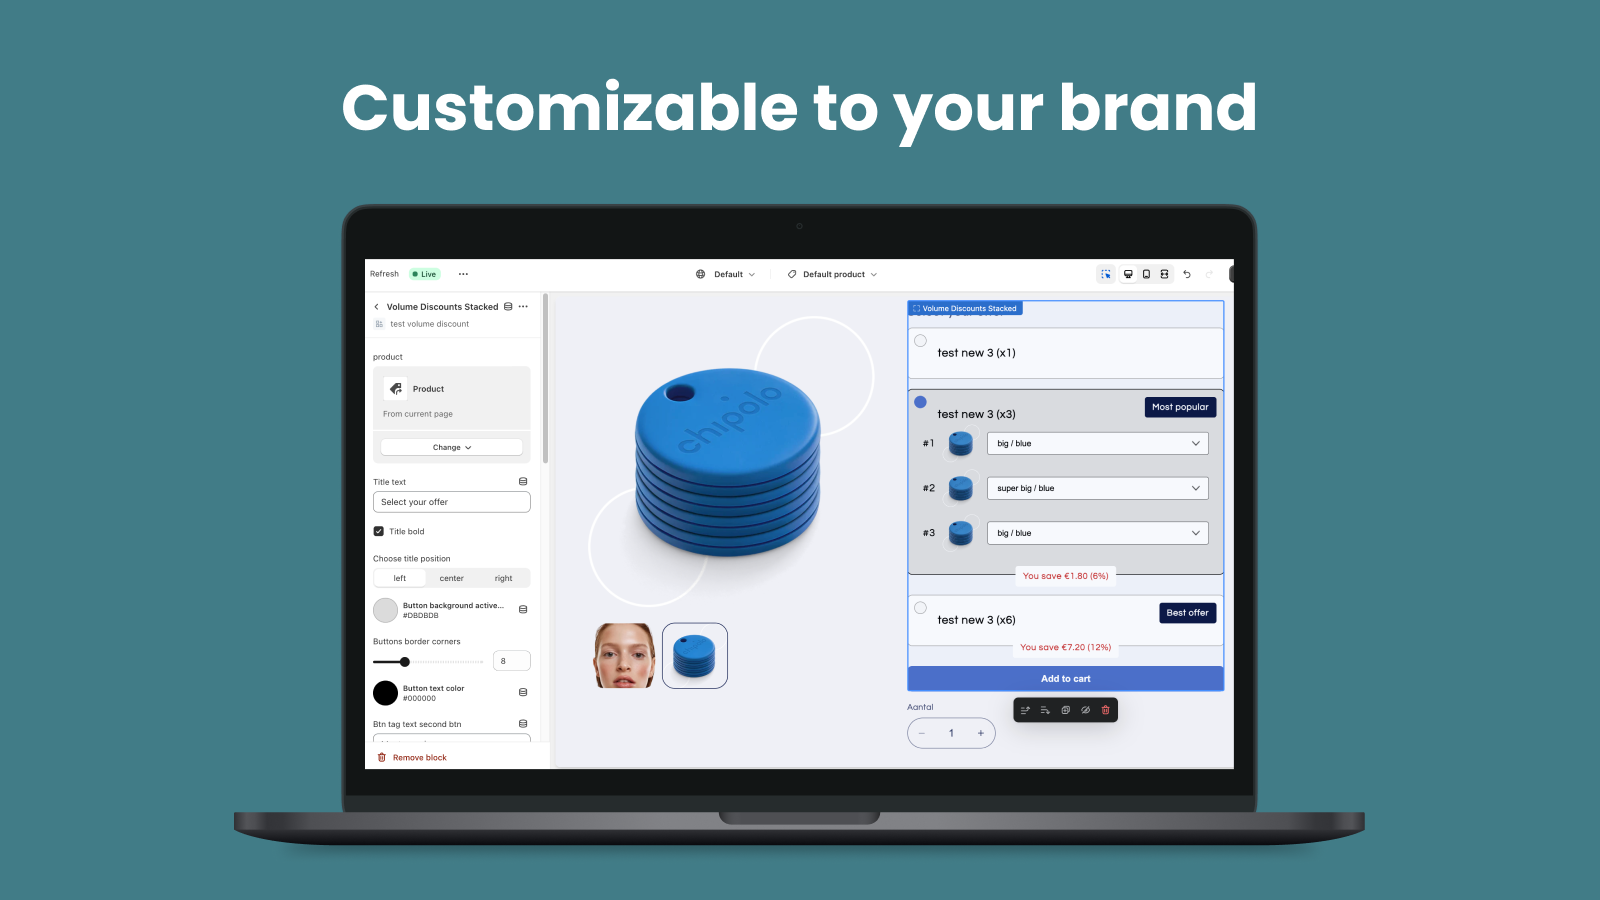 Customizable to your brand